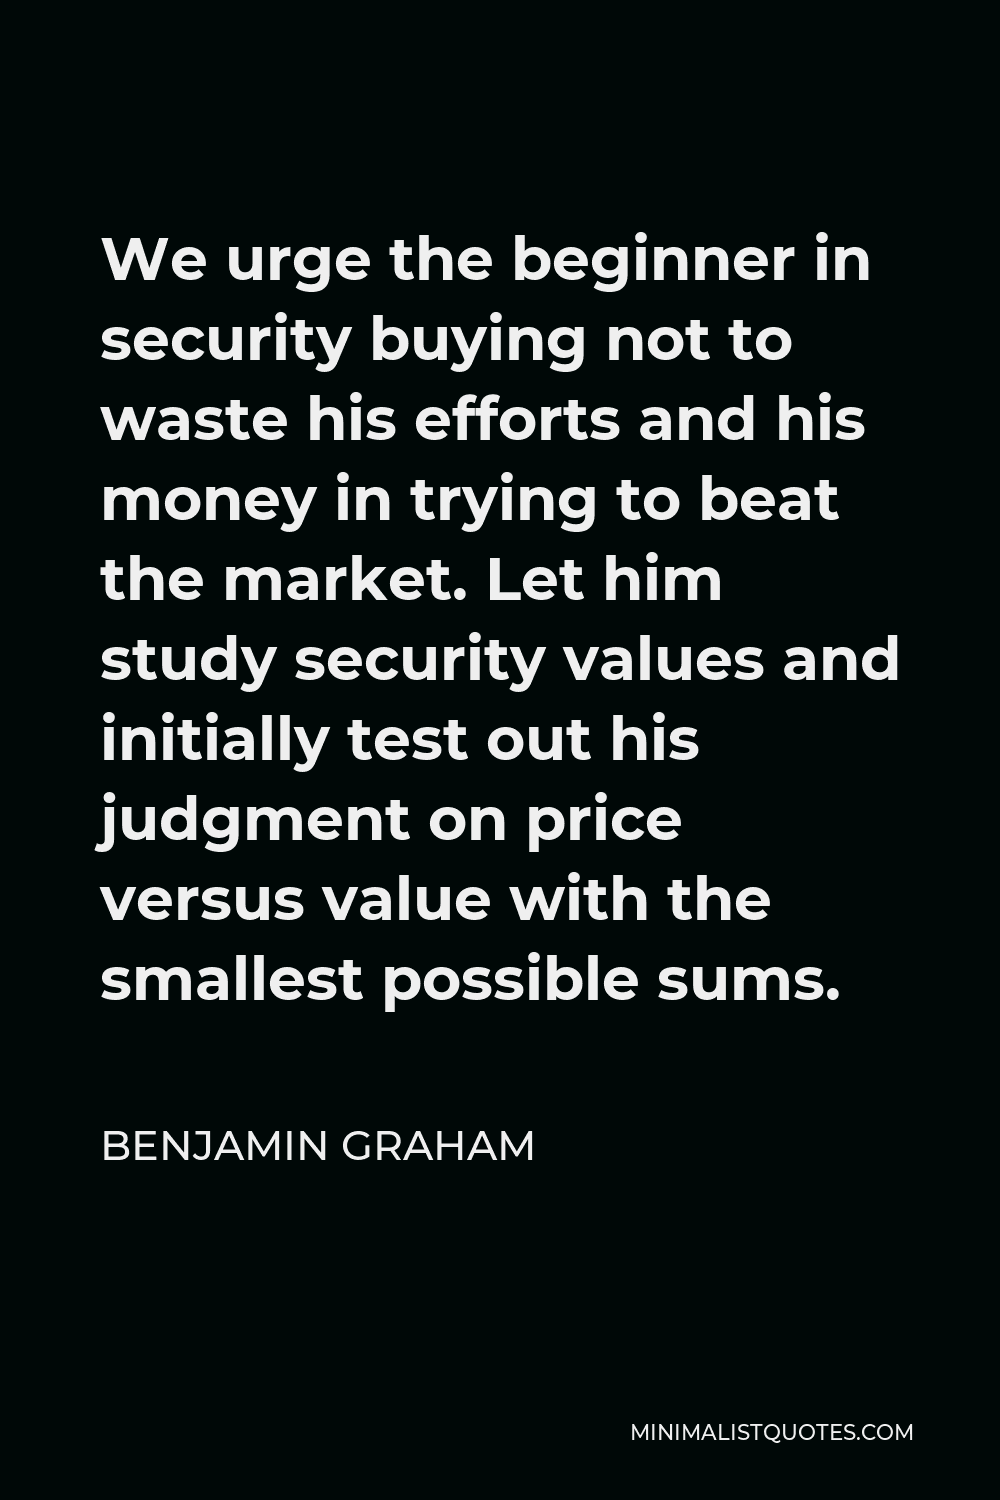 Benjamin Graham Quote - We urge the beginner in security buying not to waste his efforts and his money in trying to beat the market. Let him study security values and initially test out his judgment on price versus value with the smallest possible sums.